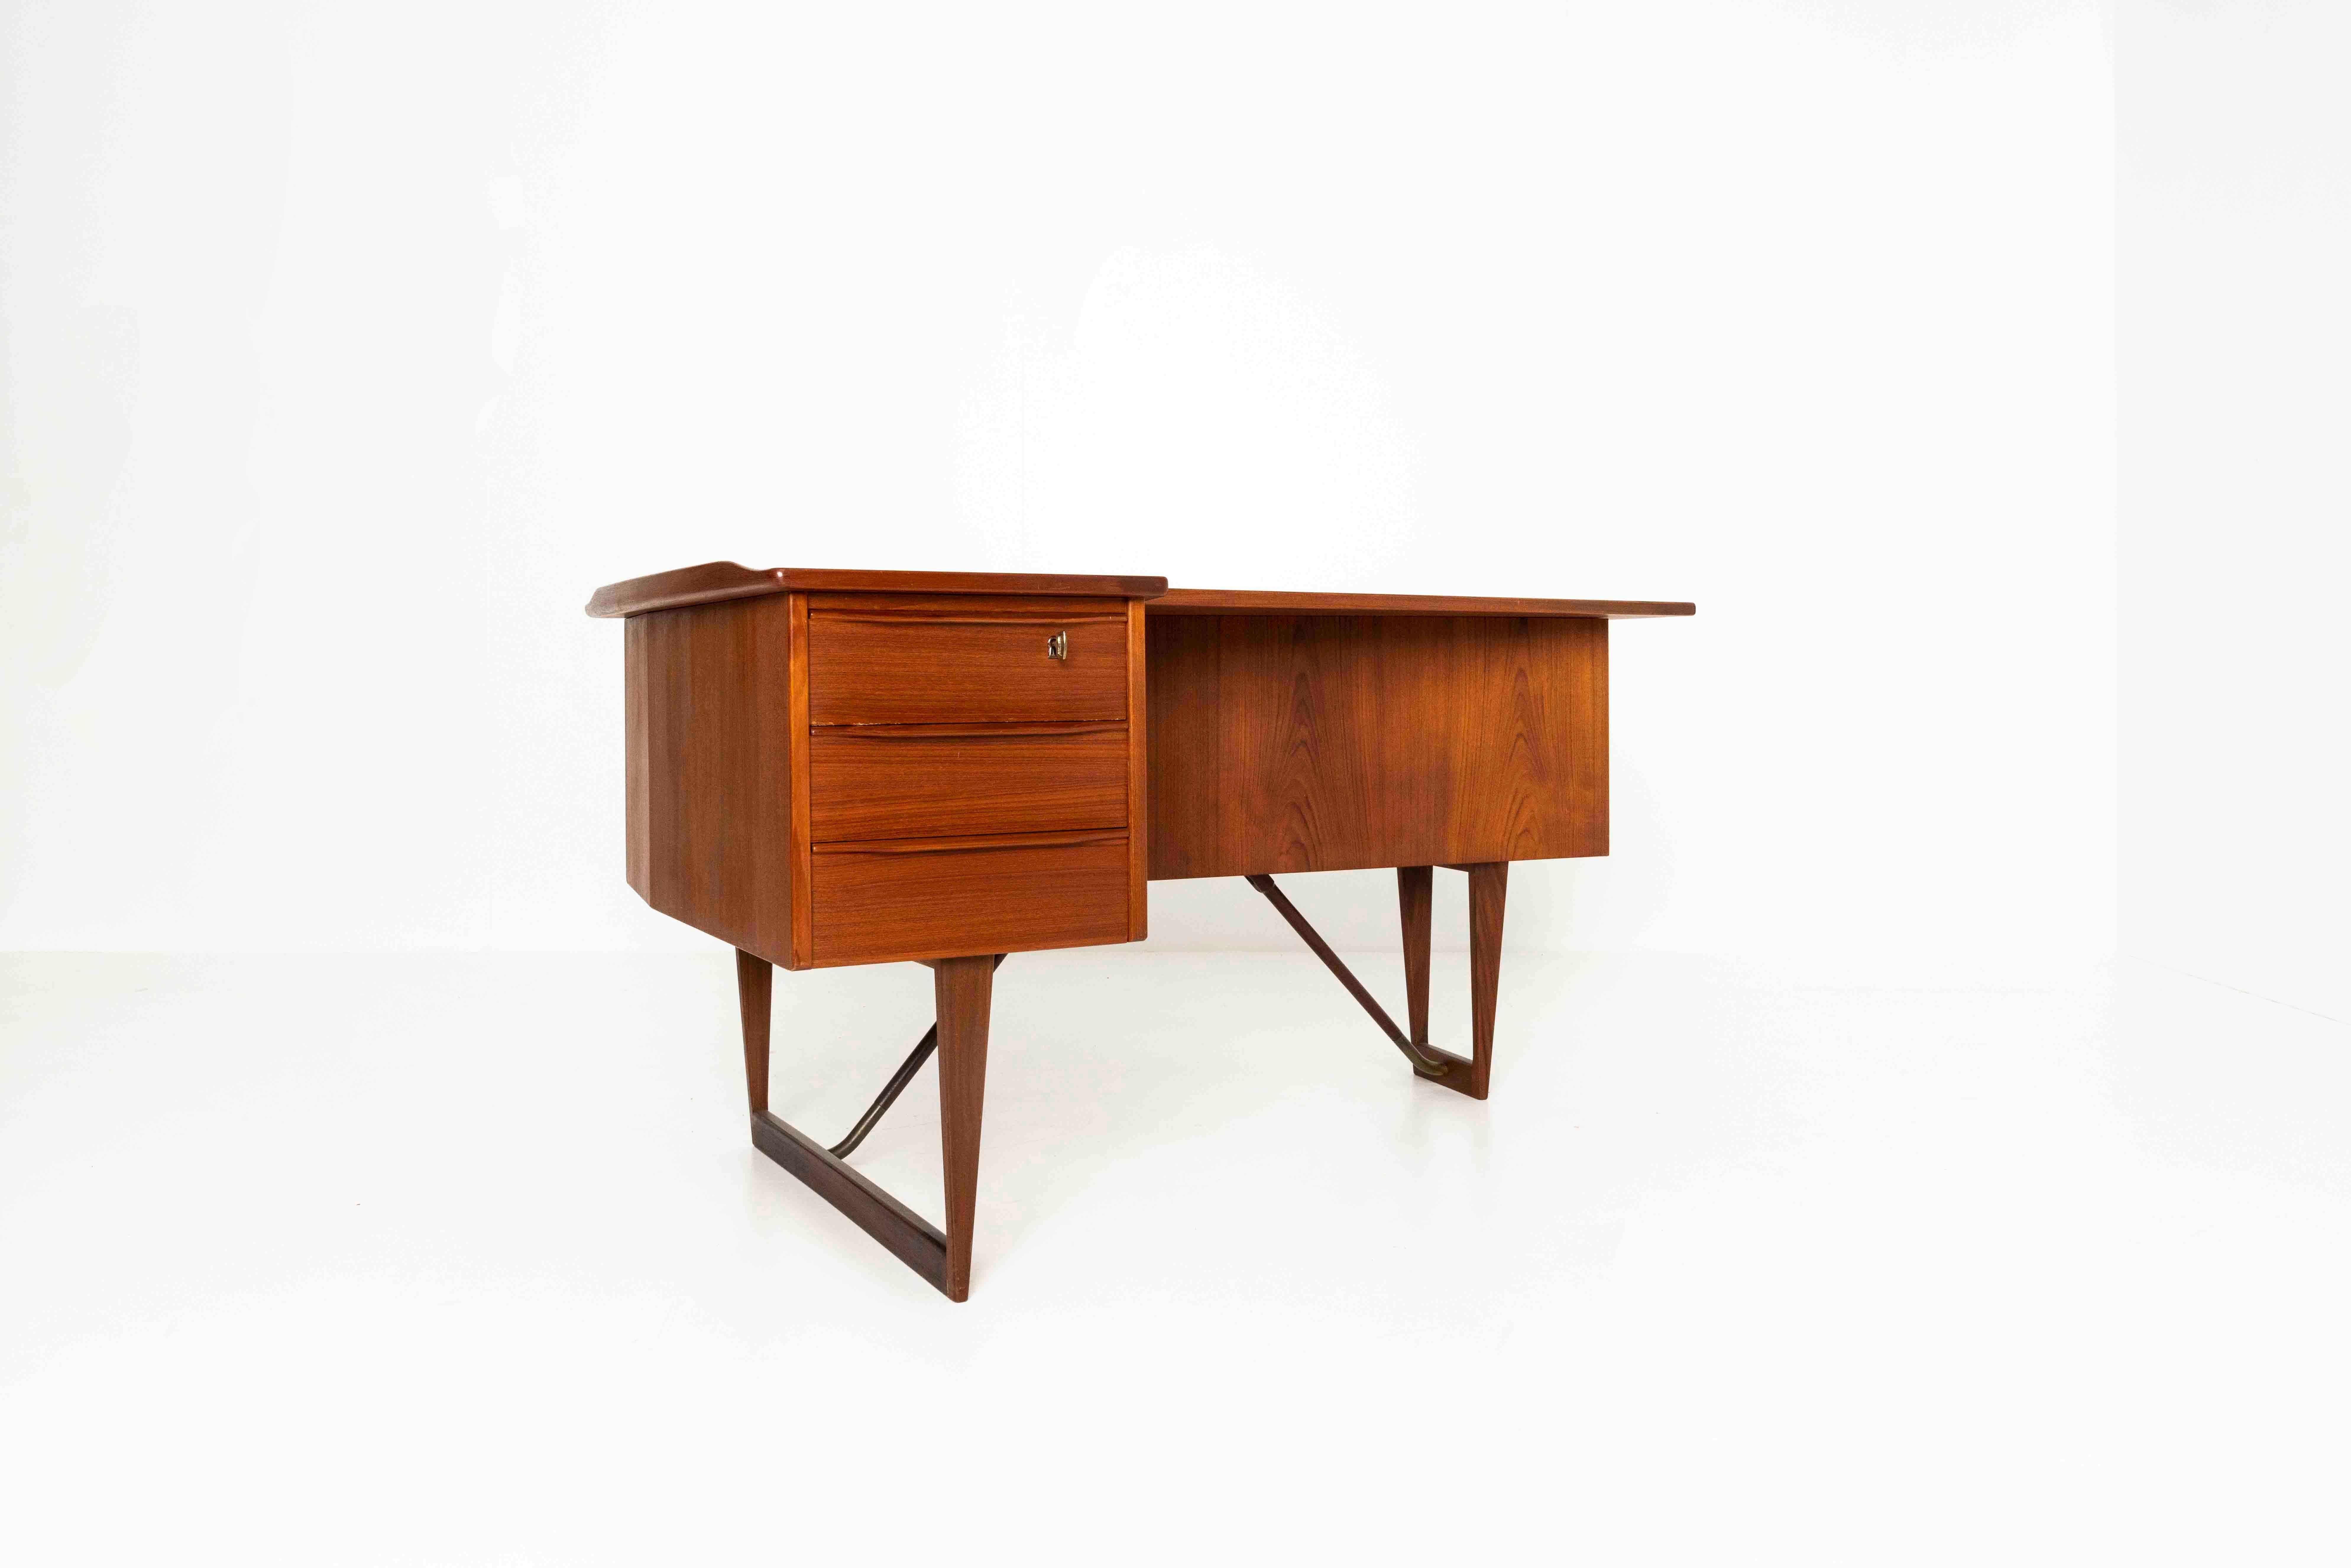 Nice boomerang desk in teak by Peter Løvig Nielsen from Denmark, 1960s. This desk can be positioned in the middle of the room, as it is very attractive from both sides. The back has a cabinet and shelves for books, whereas the front is very